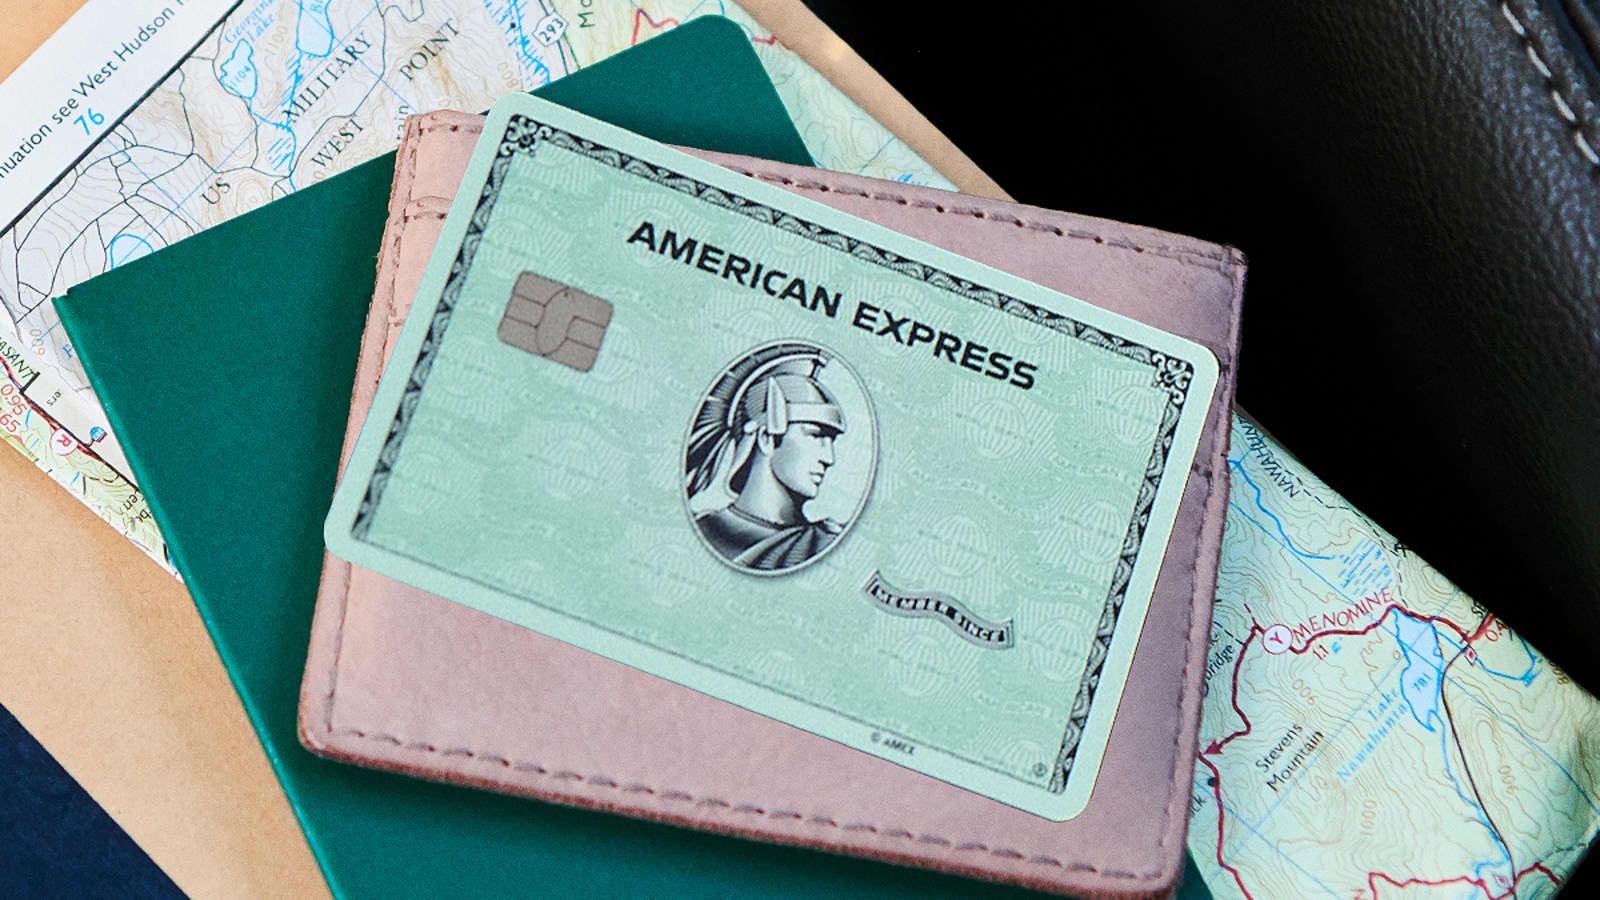 American Express Green Card relaunches with new rewards and benefits